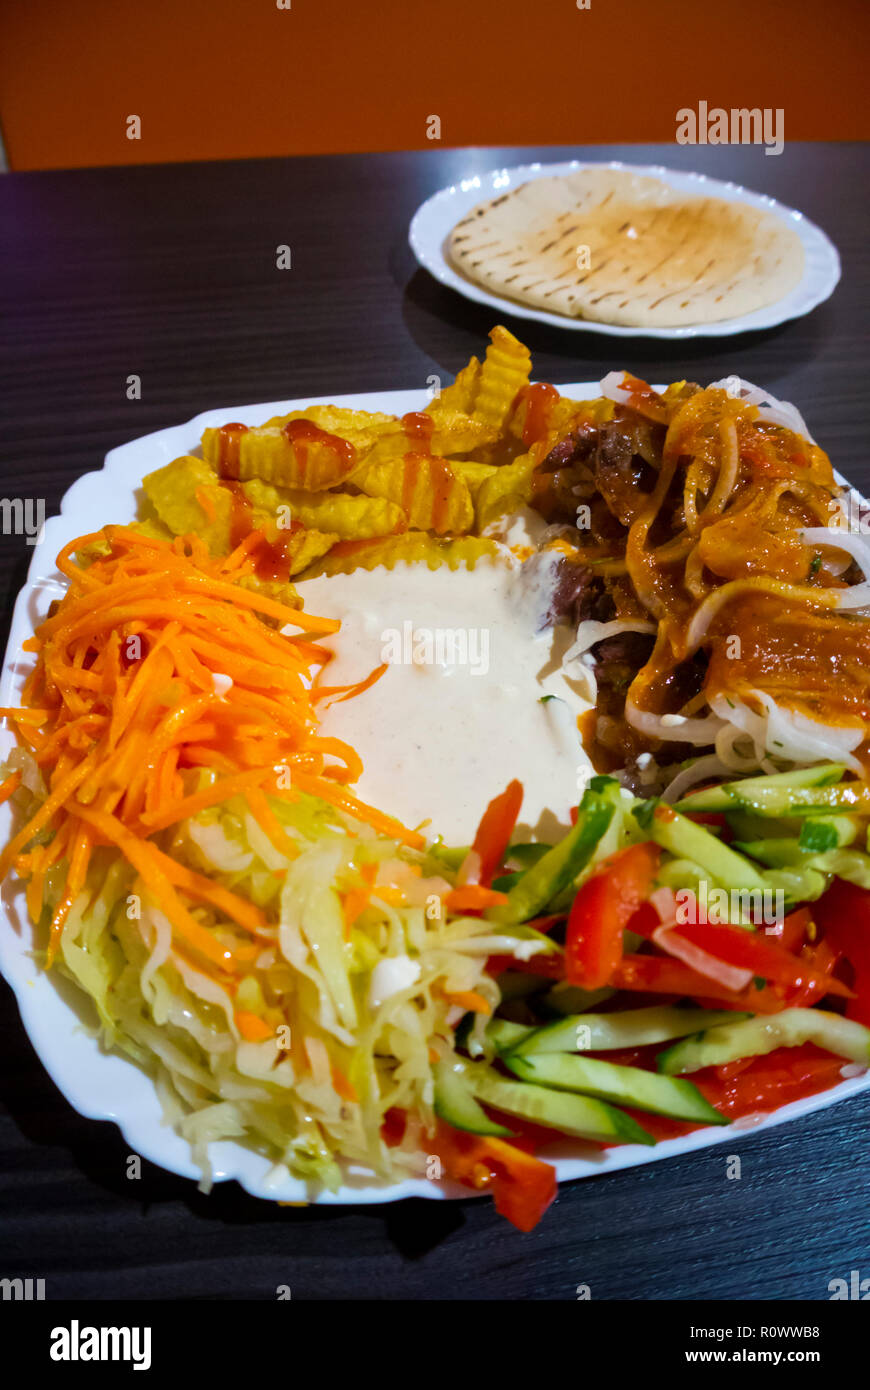 Shaverma, plate of lamb kebab with fries and salad, Saint Petersburg, Russia Stock Photo